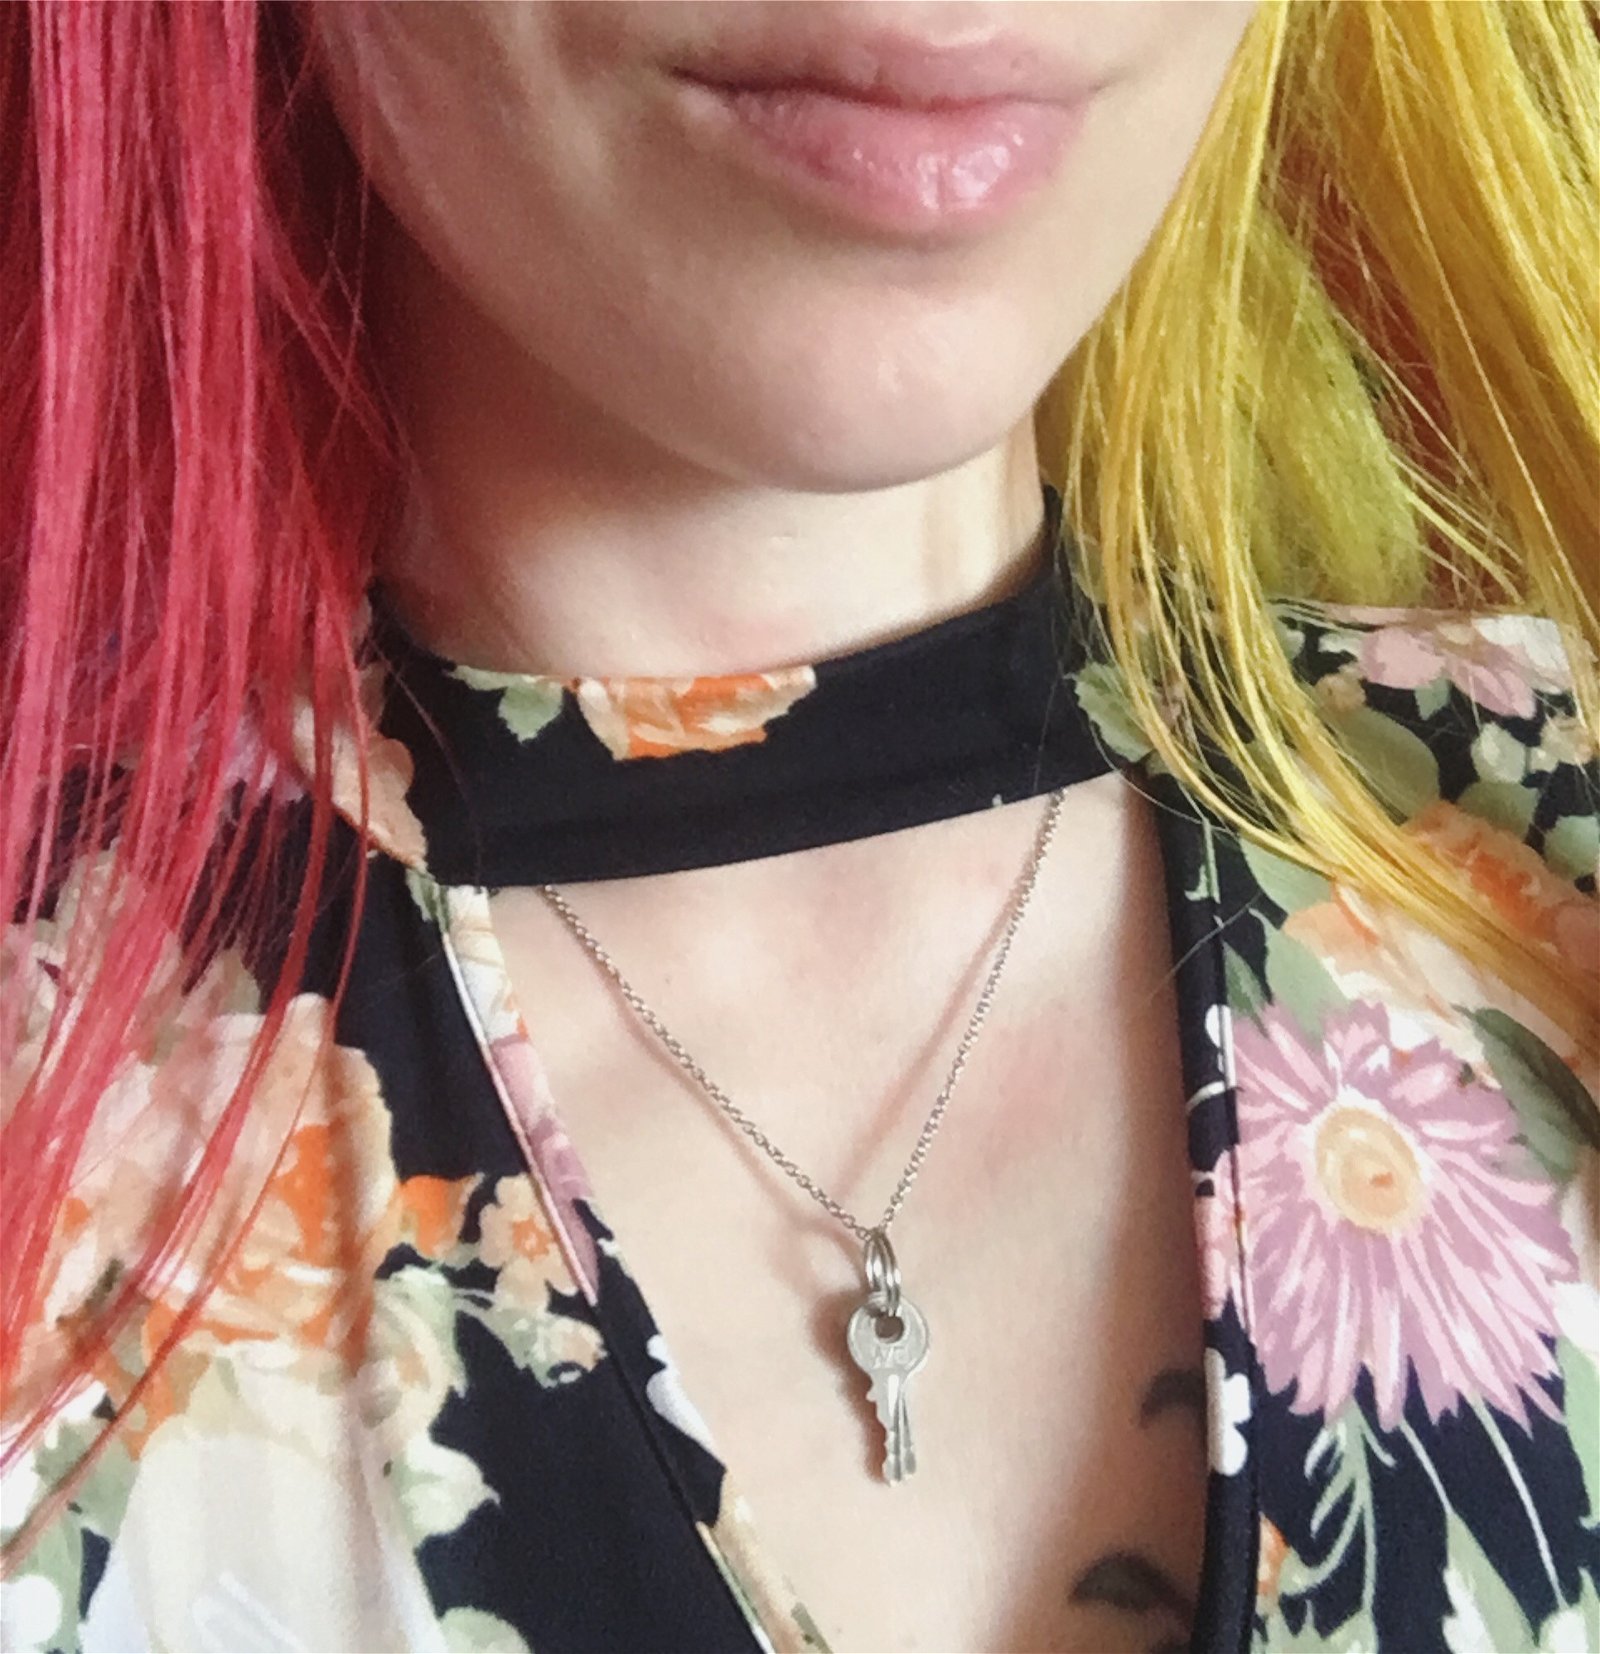 Photo by Goddess Lilith with the username @GoddessLilith, who is a star user,  July 3, 2019 at 9:40 PM. The post is about the topic Cuckolding and the text says 'I love My new necklace that’s holding these chastity keys! So pretty 😊 My bitch has been locked for 6 months and counting.....'